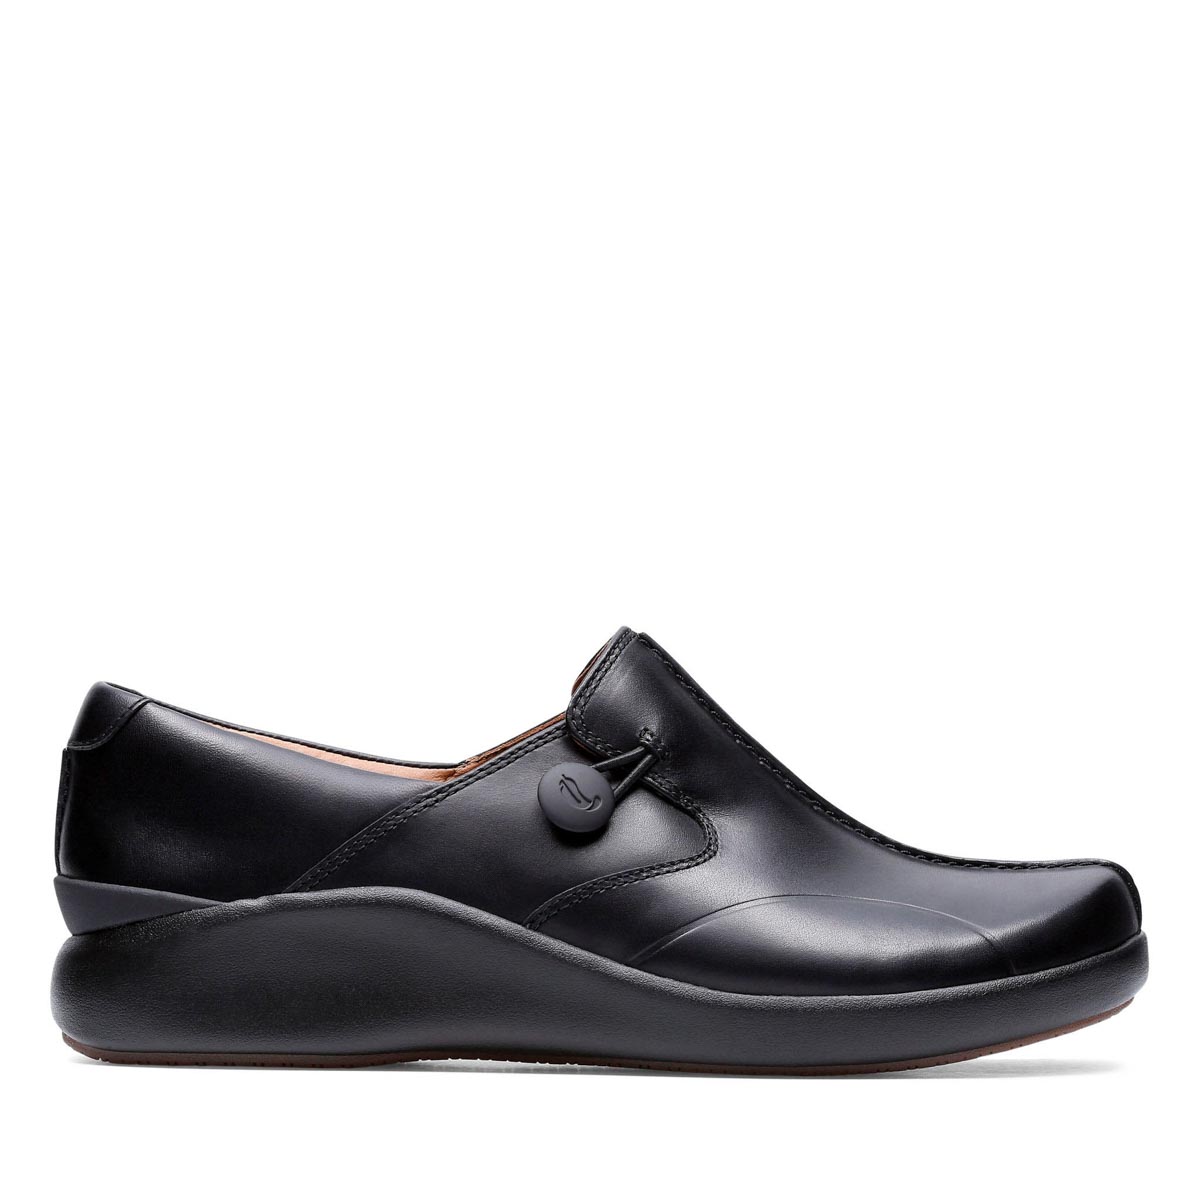 clarks shoes black leather